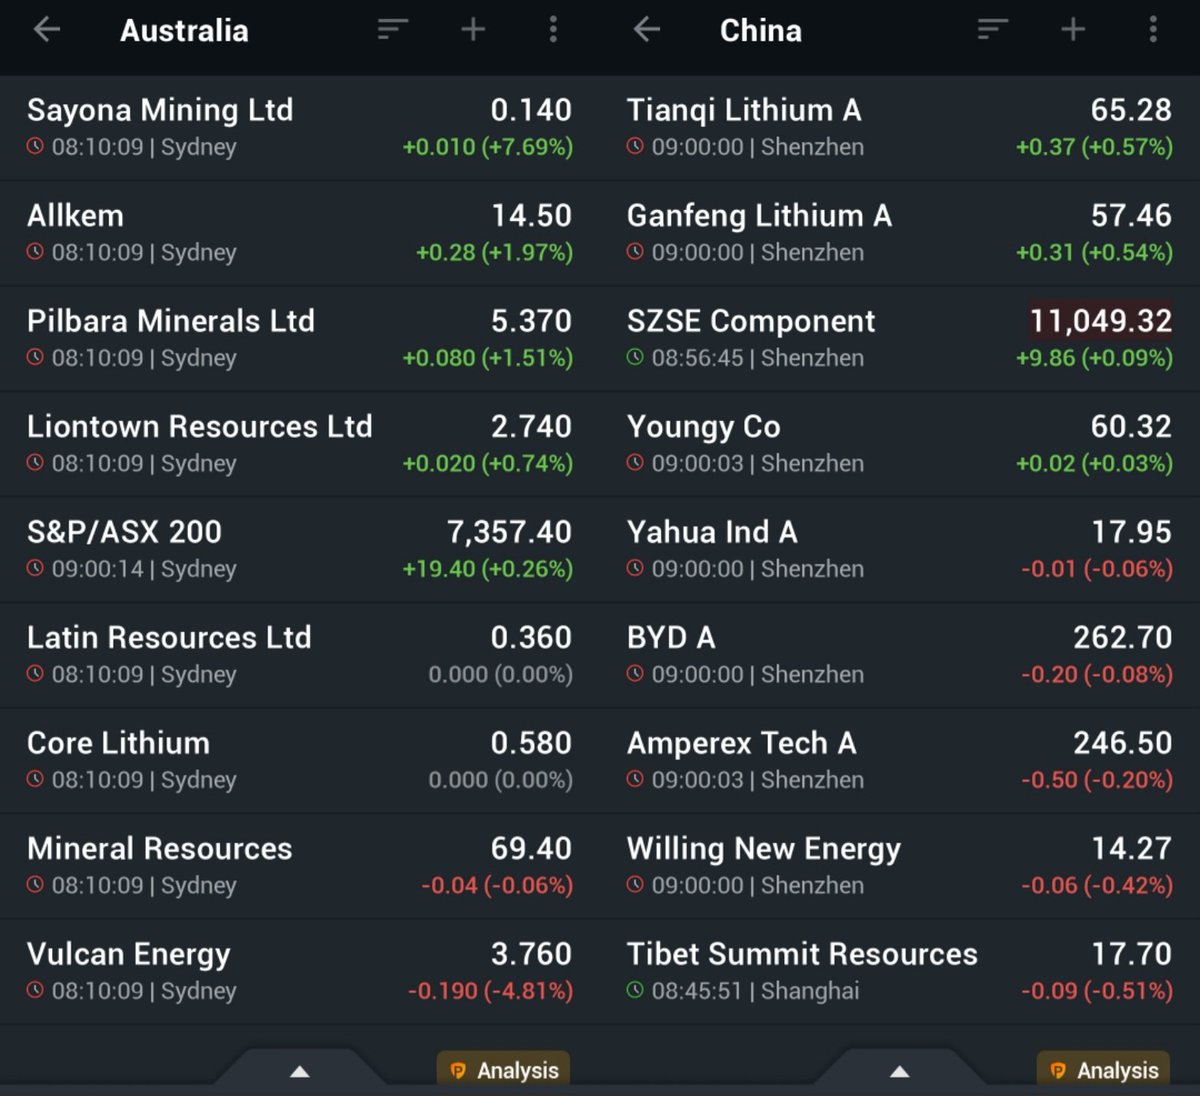 Recovery of #lithiumstocks today after broad sell-off in the last days. 
$SYA is up by almost 8% on post-slump recovery.
61 ASX lithium stocks shot up today and 58 lay flat. 45 fell below yesterday’s prices acc to @StockheadAU.
#asxstocks #chinesestocks